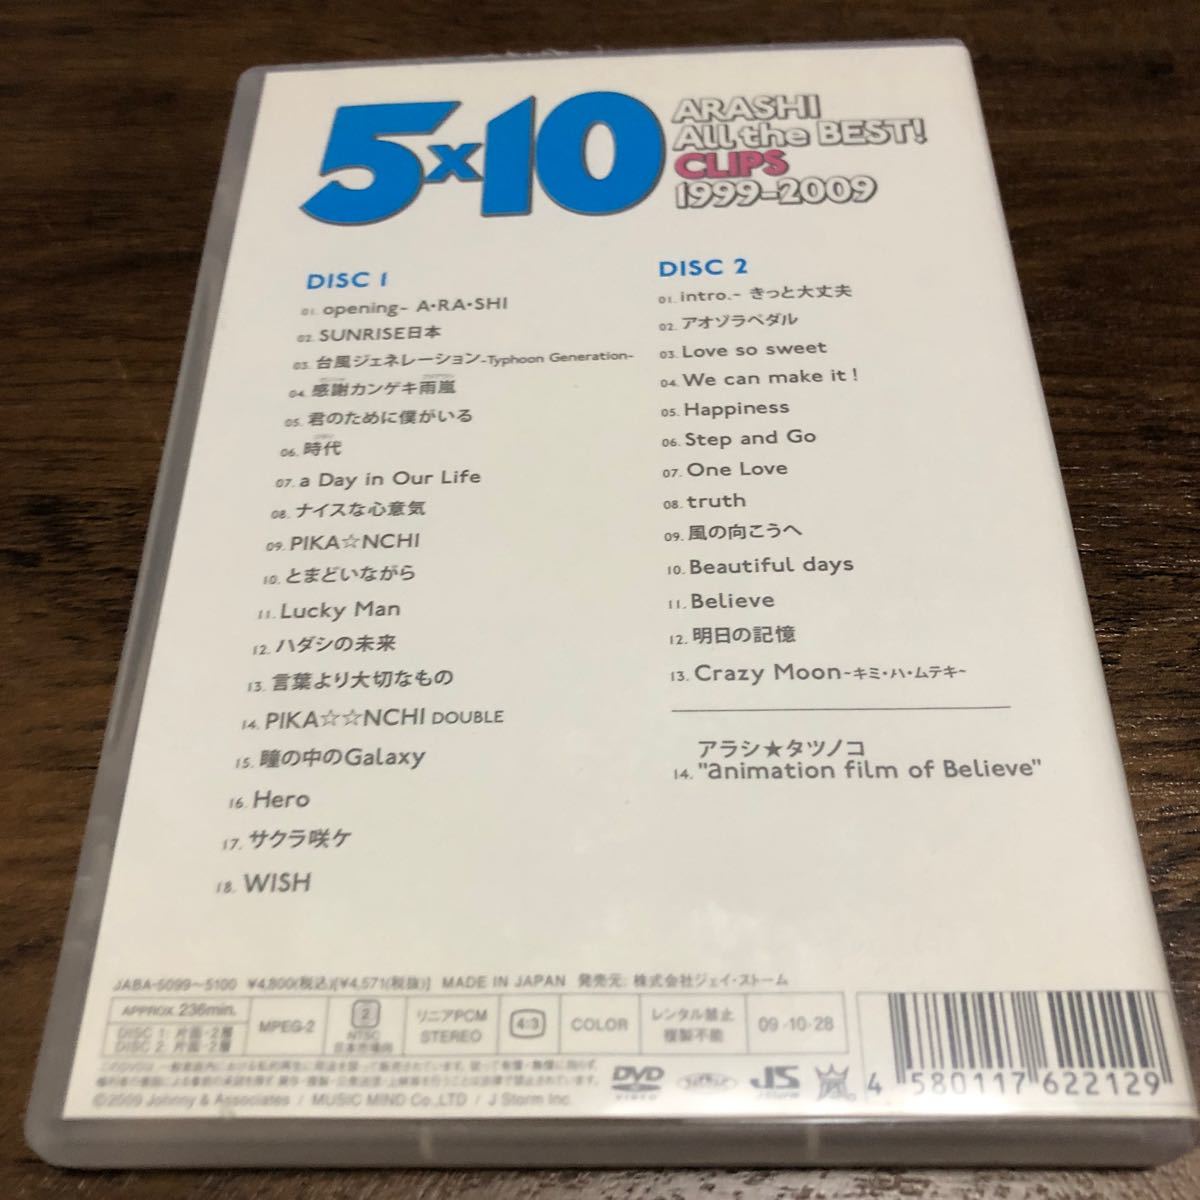 5×10 All the BEST! CLIPS 1999-2009 [DVD]